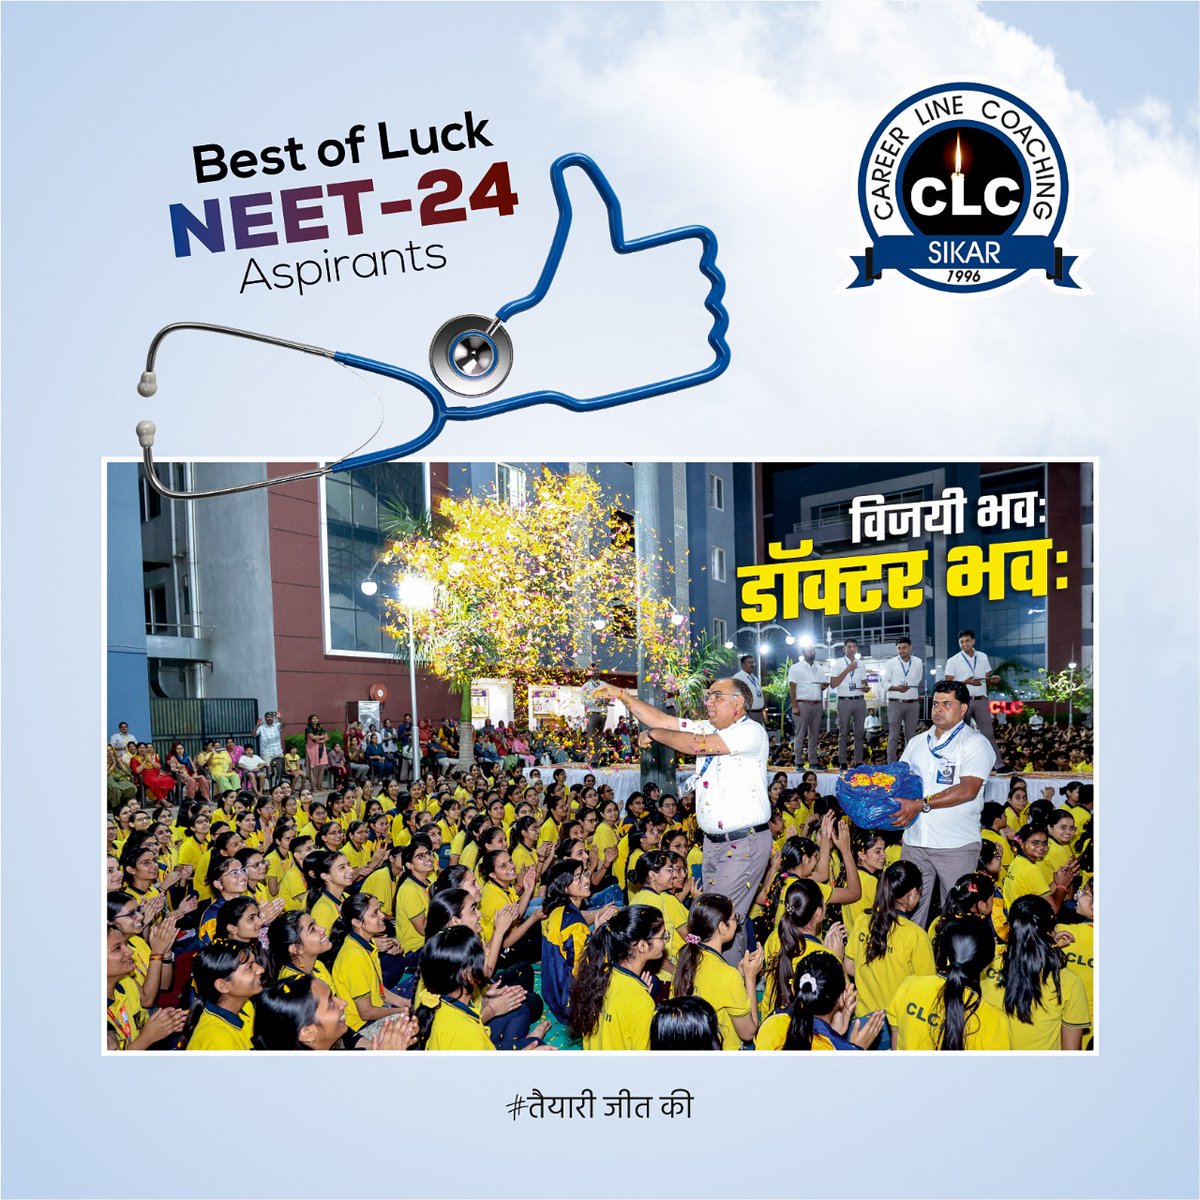 👨‍🎓 विजयी भवः  डॉक्टर भवः 🧑🏻‍⚕️
🌟 Best of luck, NEET 2024 aspirants! 🌟

The countdown to your success begins now! 🚀

Wishing you all the success and triumph in the world, NEET 2024 aspirants! Let's make this journey one for the books! ✨✌

#CLC #NEET #NEETAspirants #AllTheBest